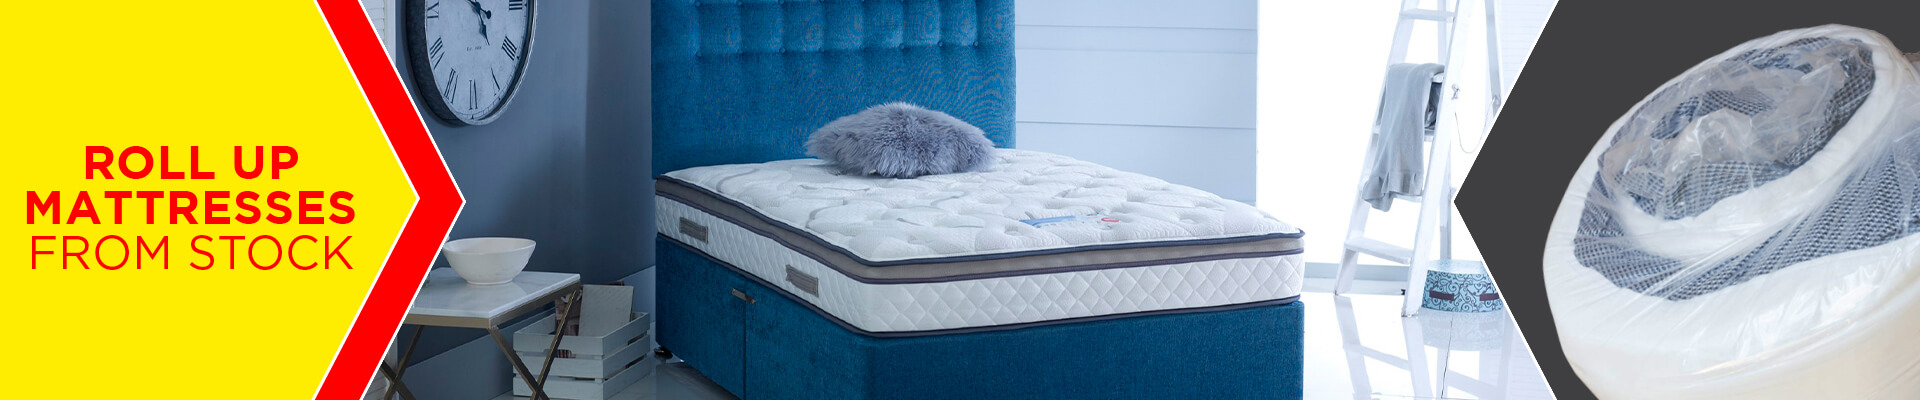 Top quality mattresses, available from stock!